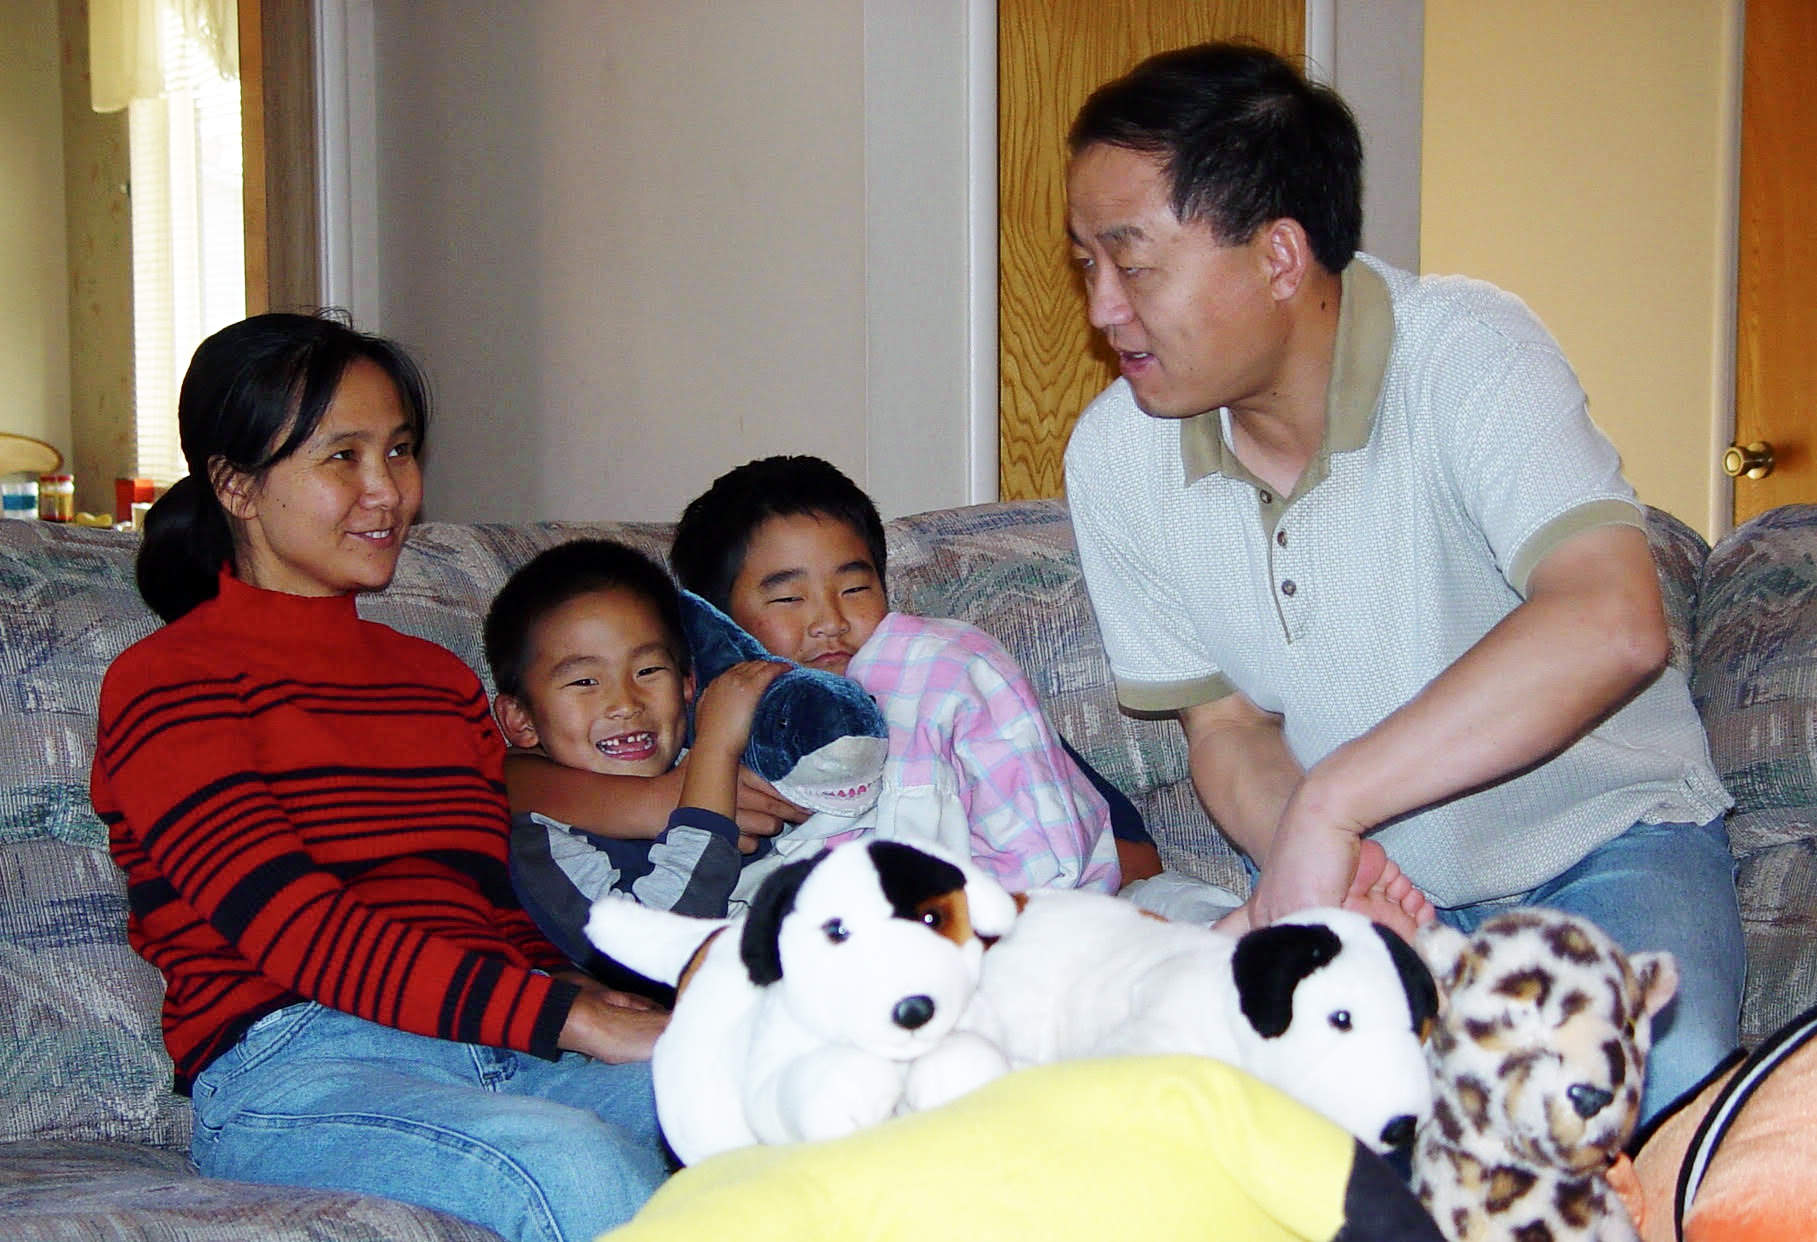 Diwu with his family.